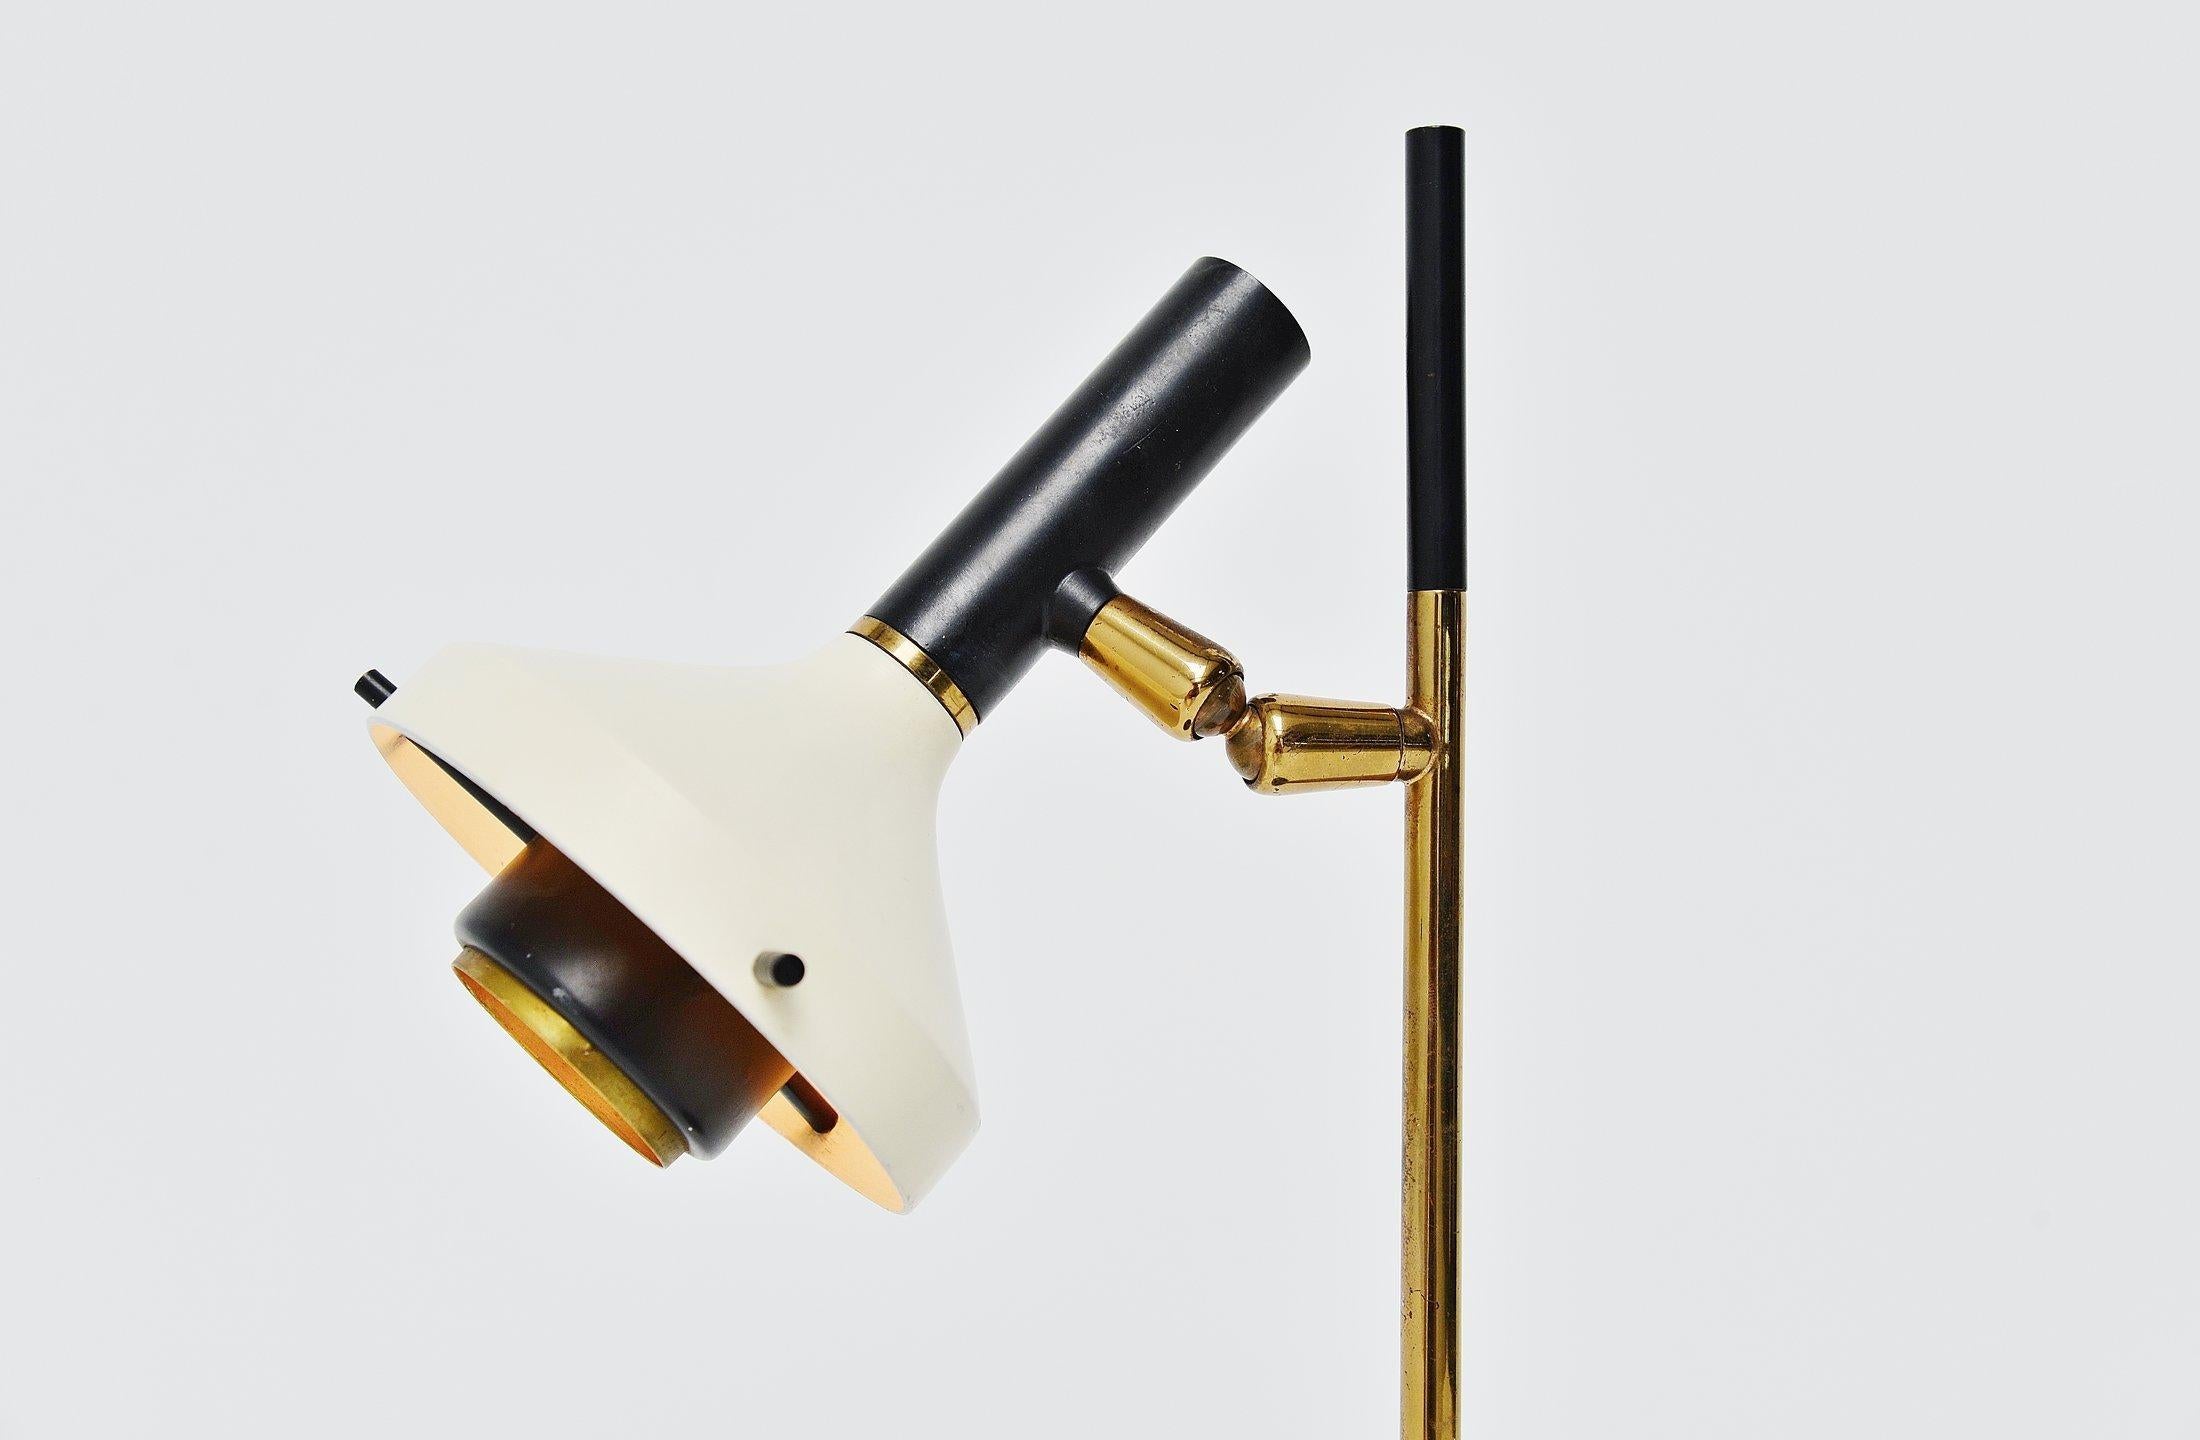 Very nice small table lamp model 533 designed by Oscar Torlasco and manufactured by Lumi, Italy, 1950. This lamp has a lens shade that you can aim in every direction. Fully adjustable table lamp with black weighed base and brass arm. The shade is in